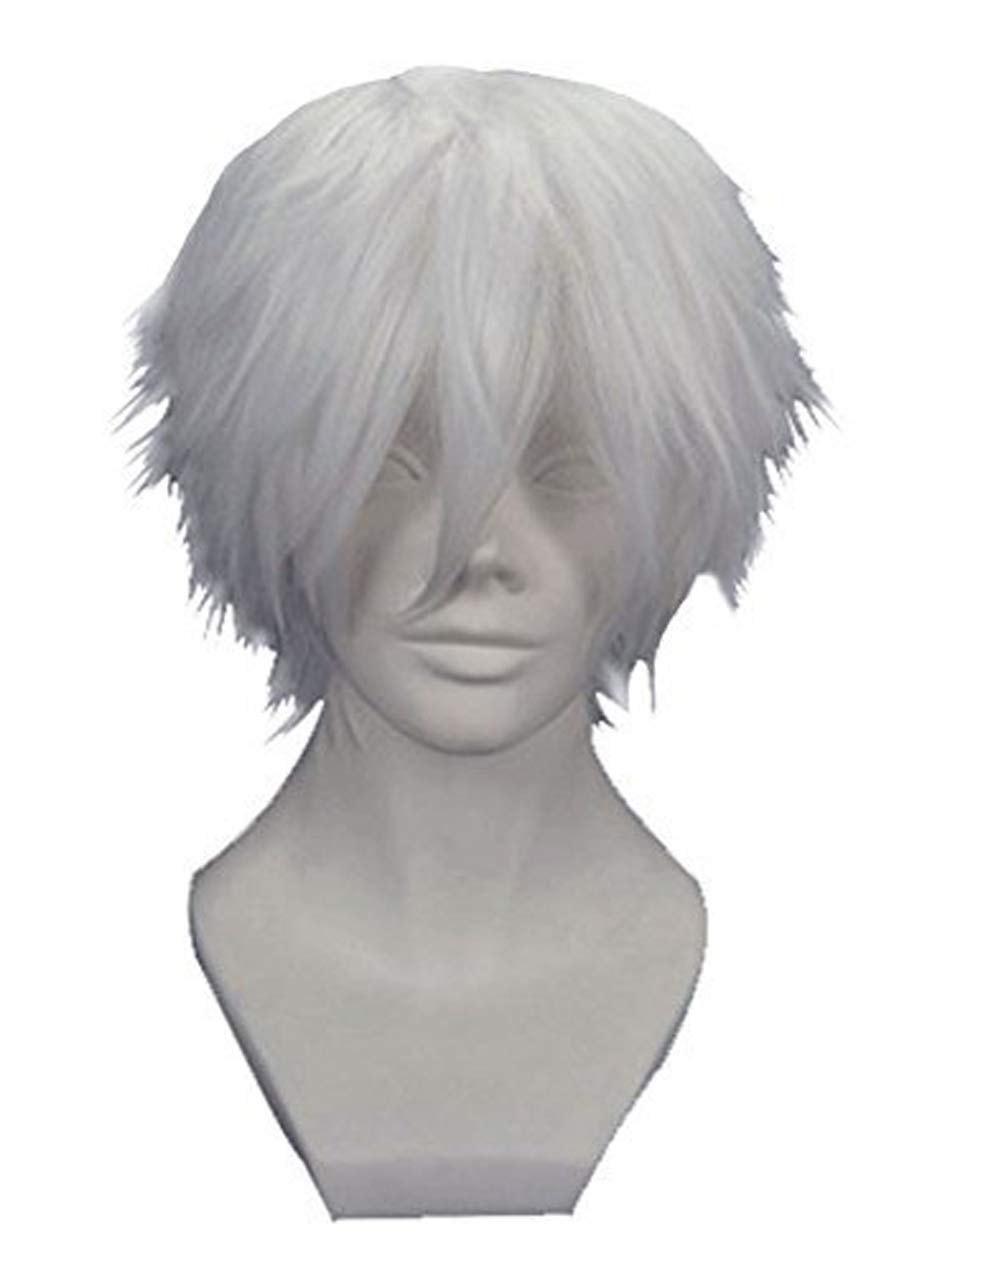 Price:$14.98    Anogol Hair Cap + Silver White Men's Short Straight Costume Party Cosplay Wig  Beauty